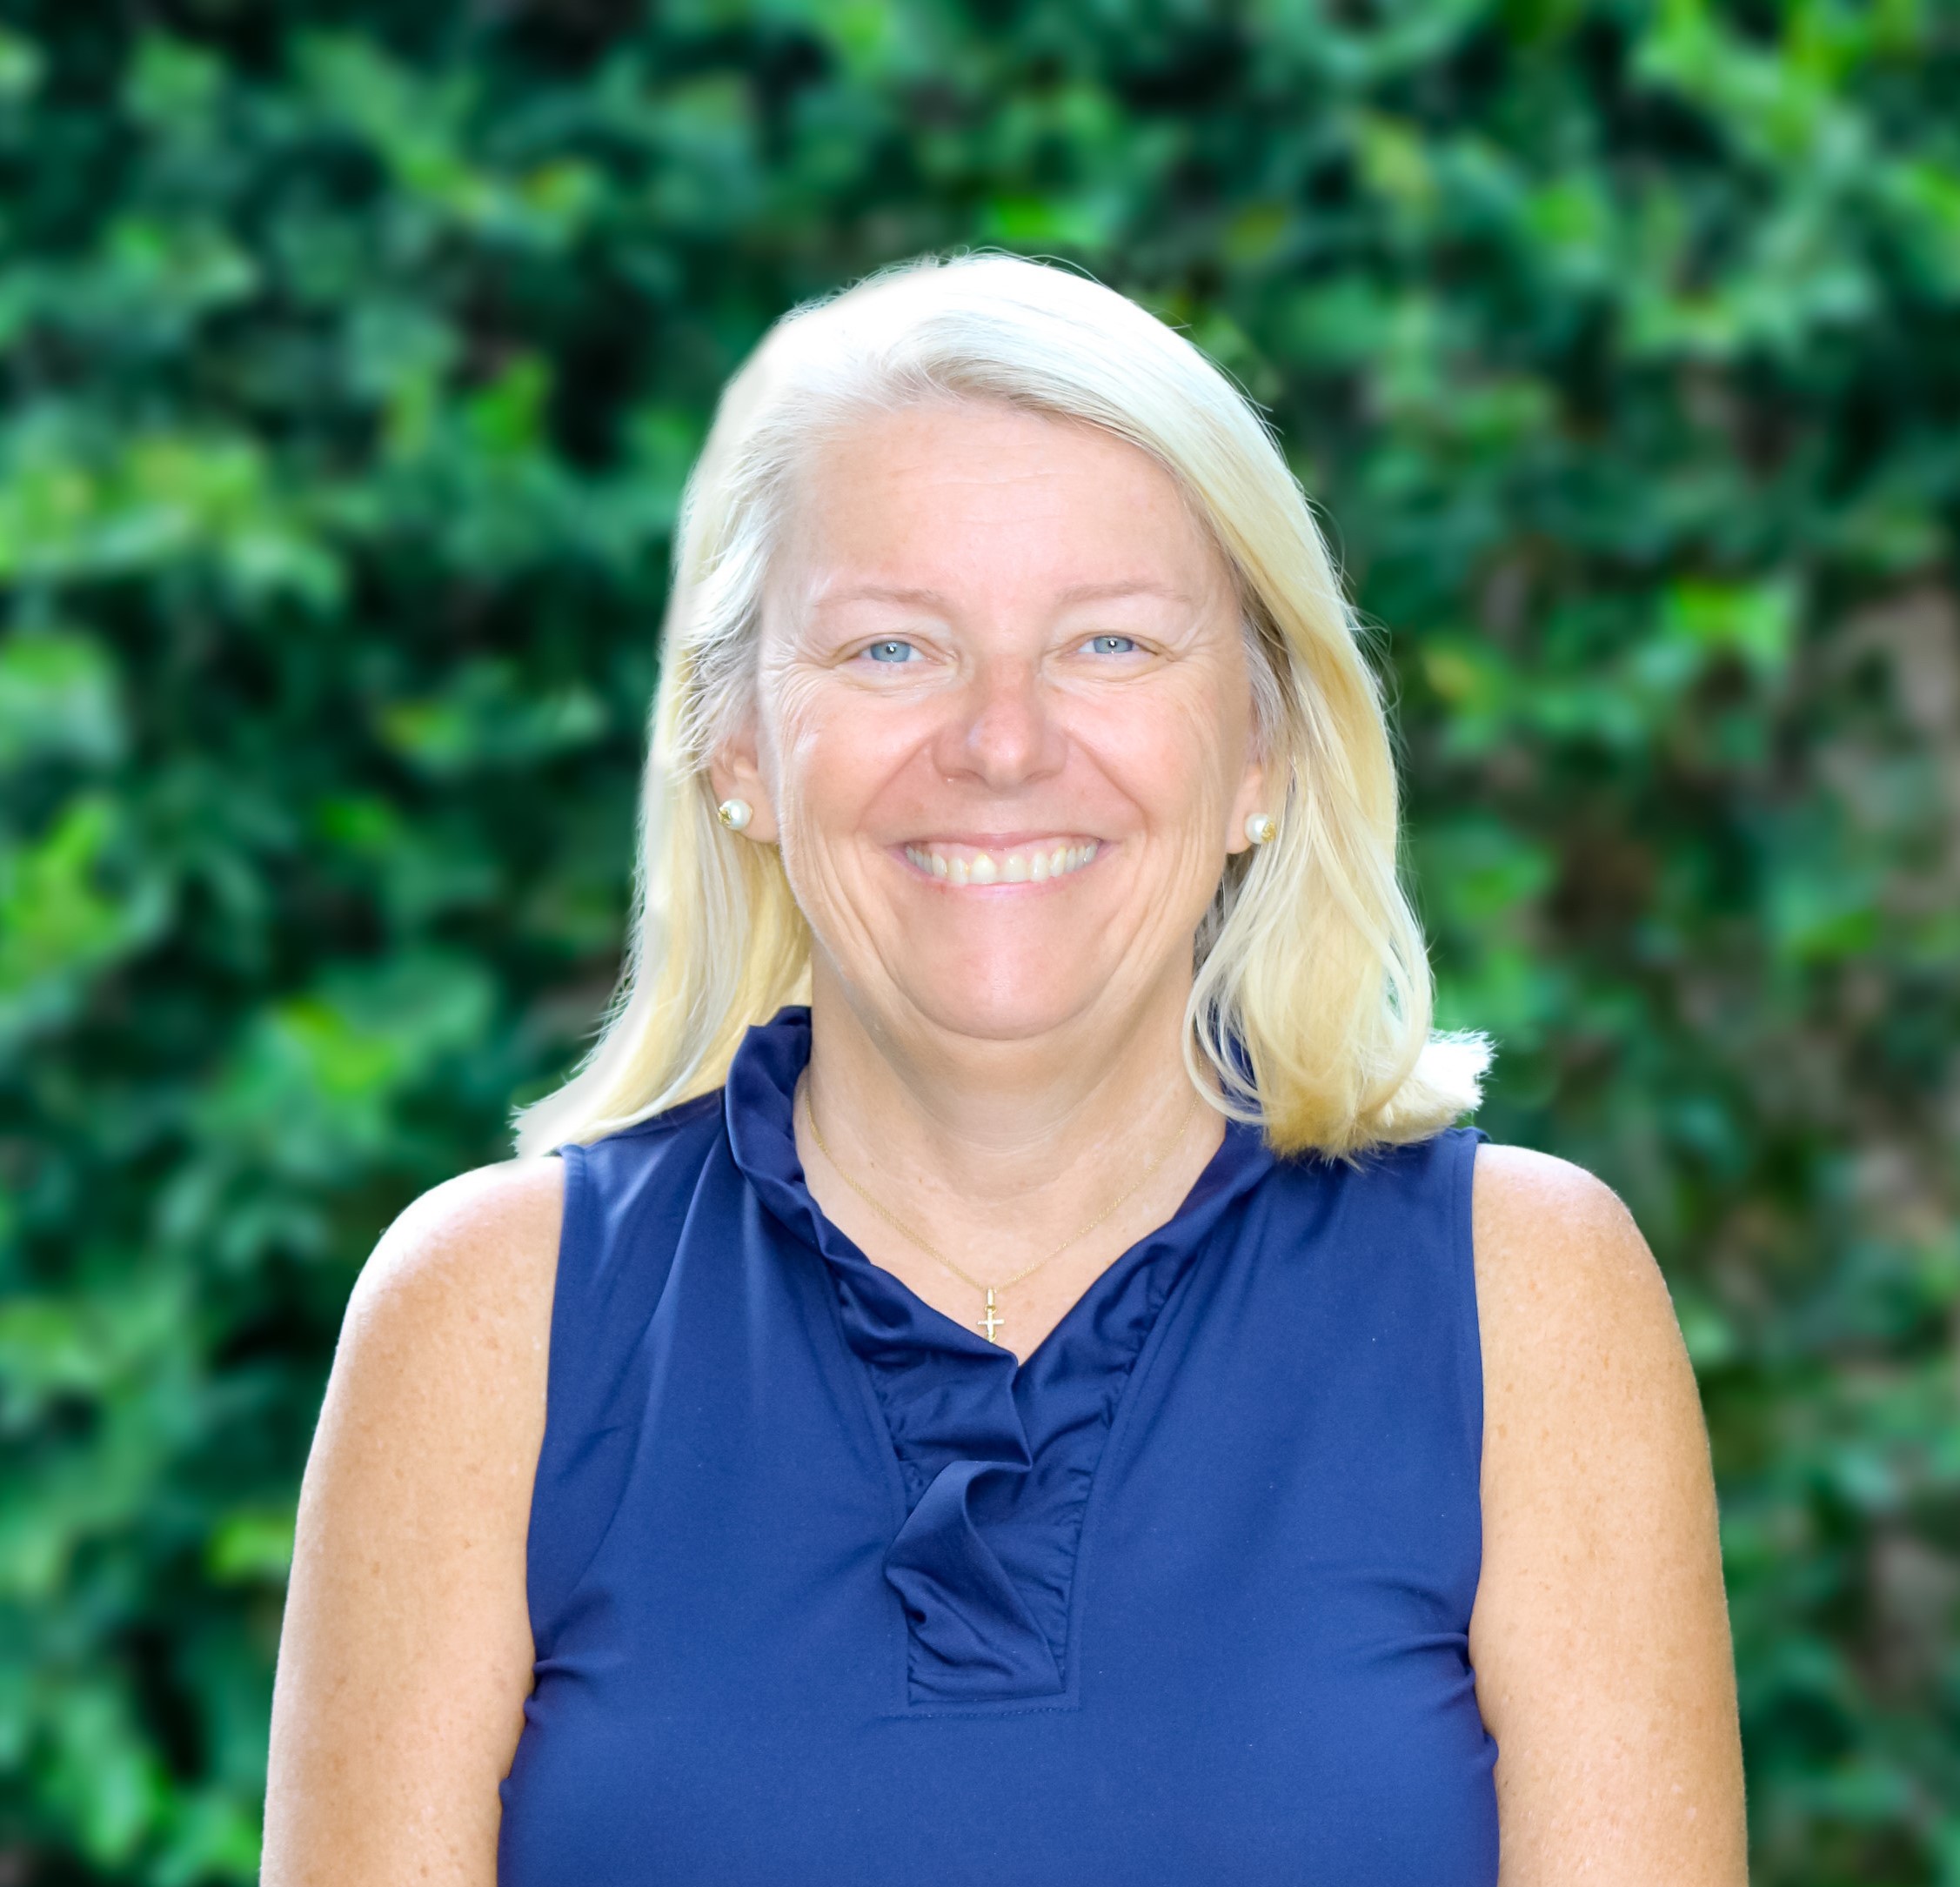 Meet Michele Reilly, General Manager for Willoughby Golf Club in Stuart, Florida